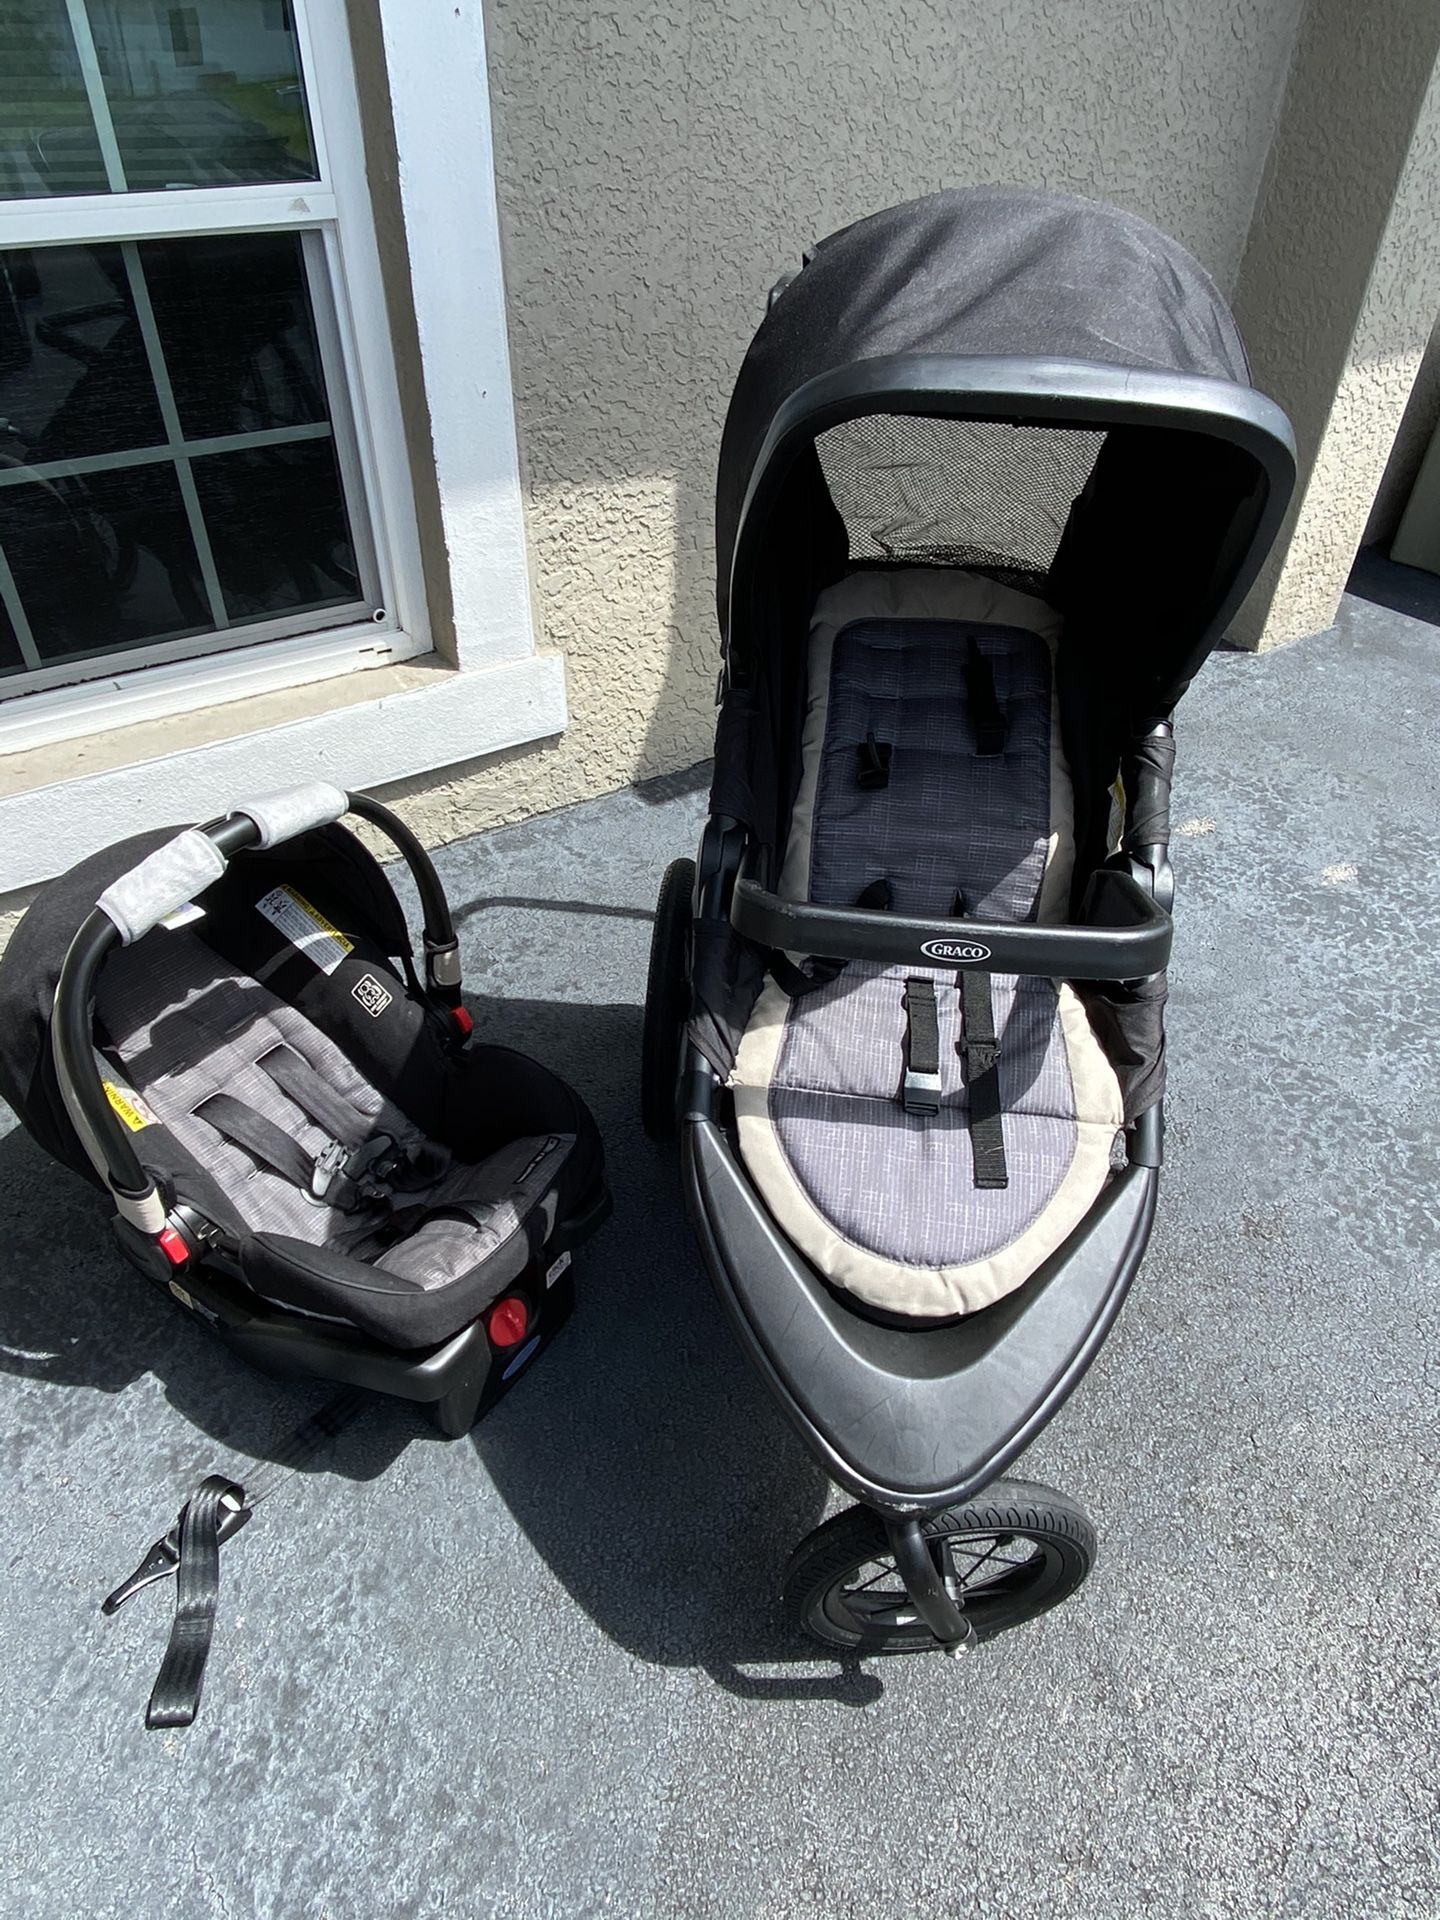 Graco Jogging stroller and 2 car bases